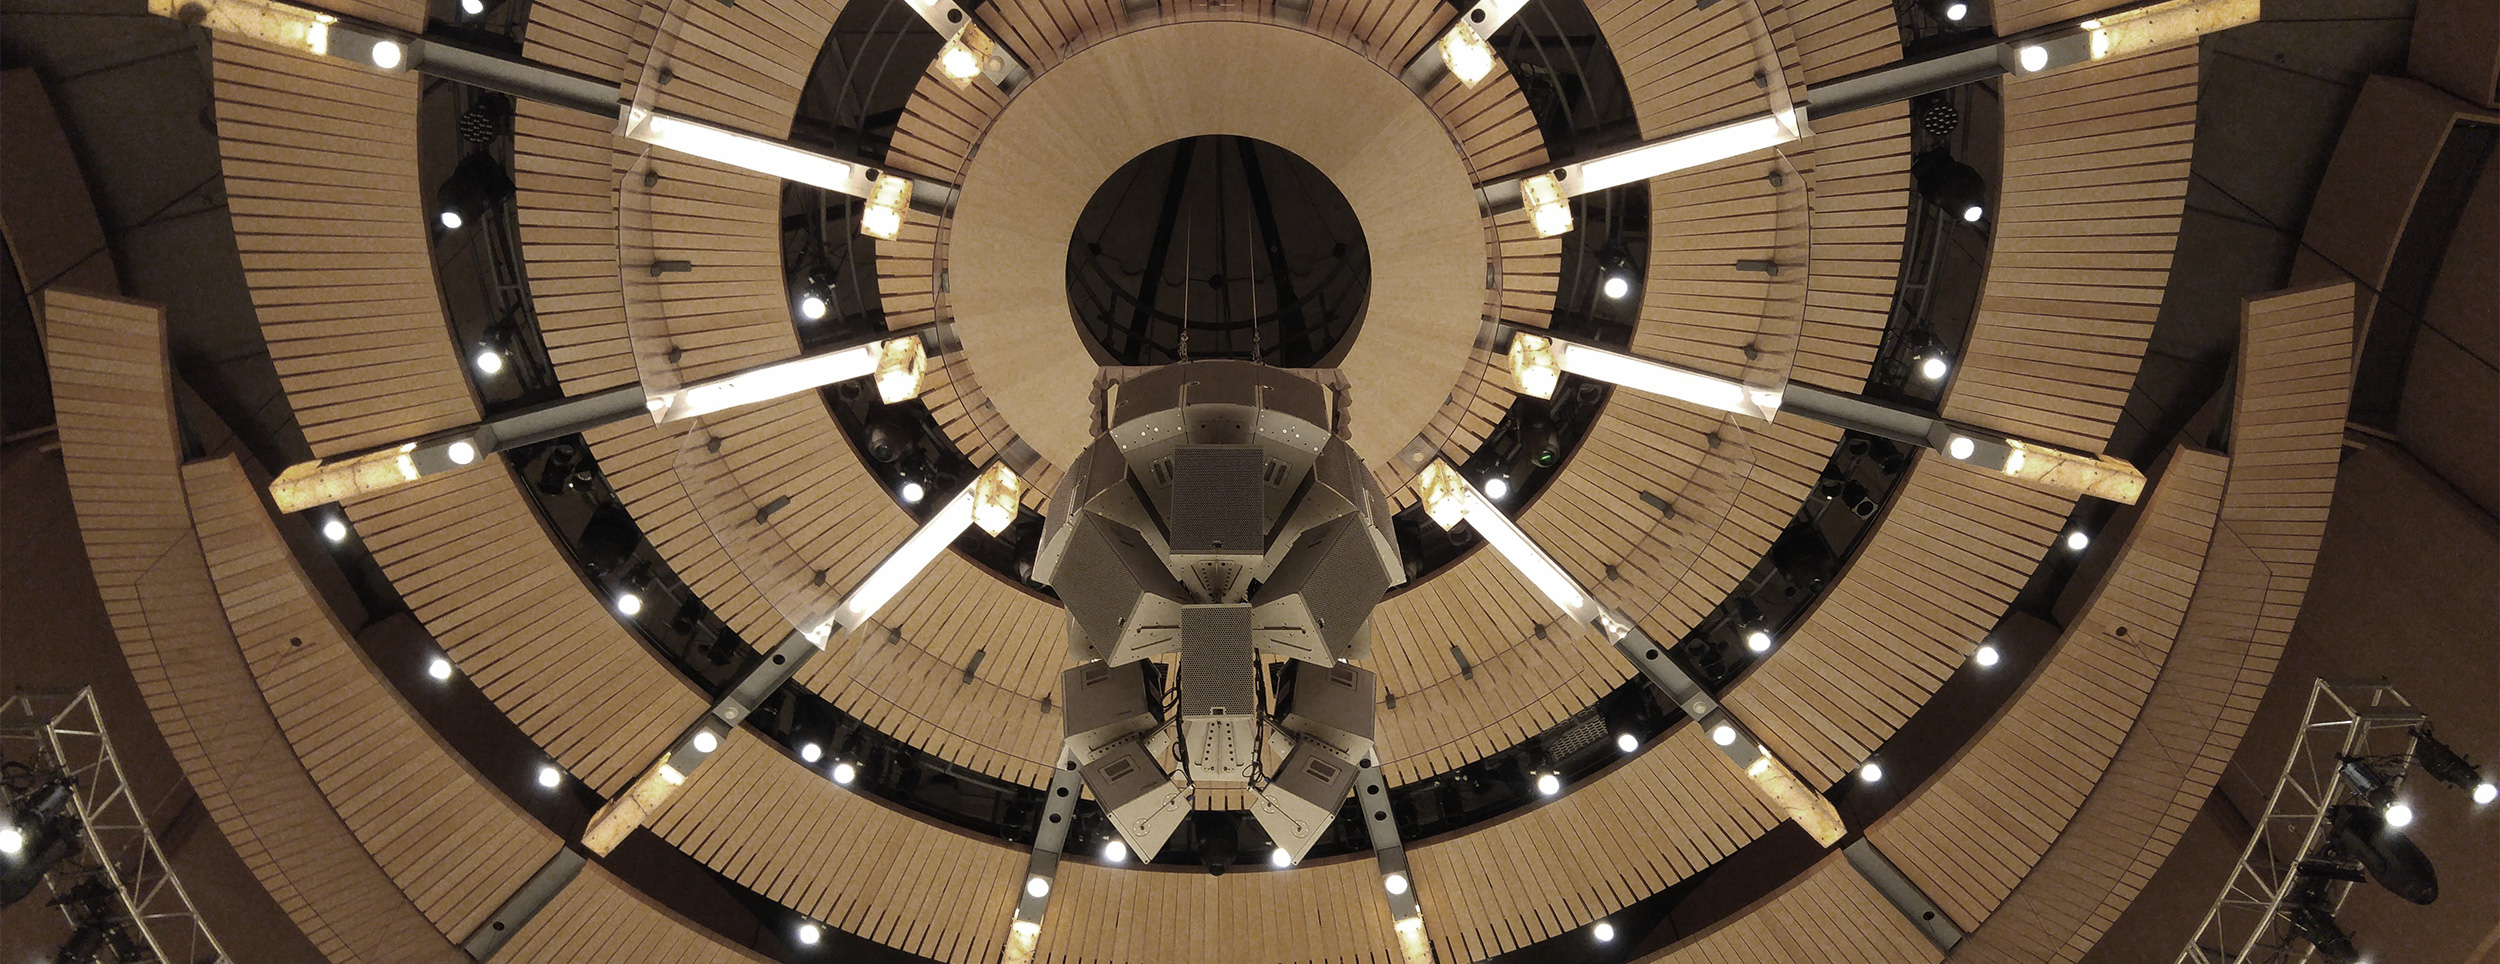 Electroacoustic ceiling at Roy Thomson Hall. Photo.